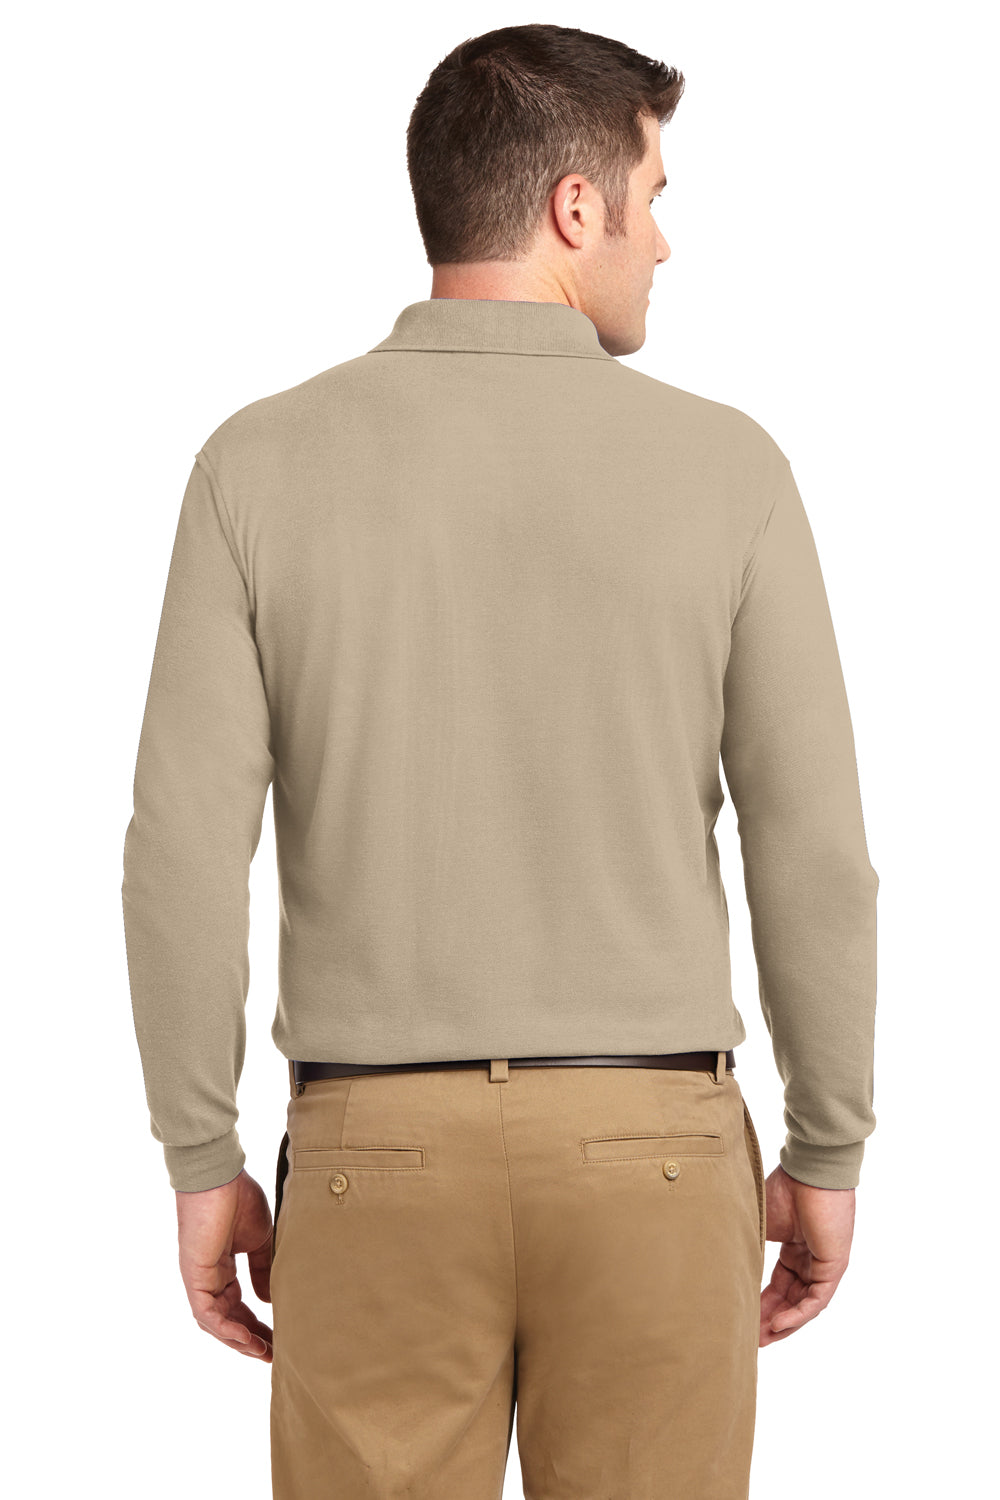 Port Authority K500LS Mens Silk Touch Wrinkle Resistant Long Sleeve Polo Shirt Stone Brown Back